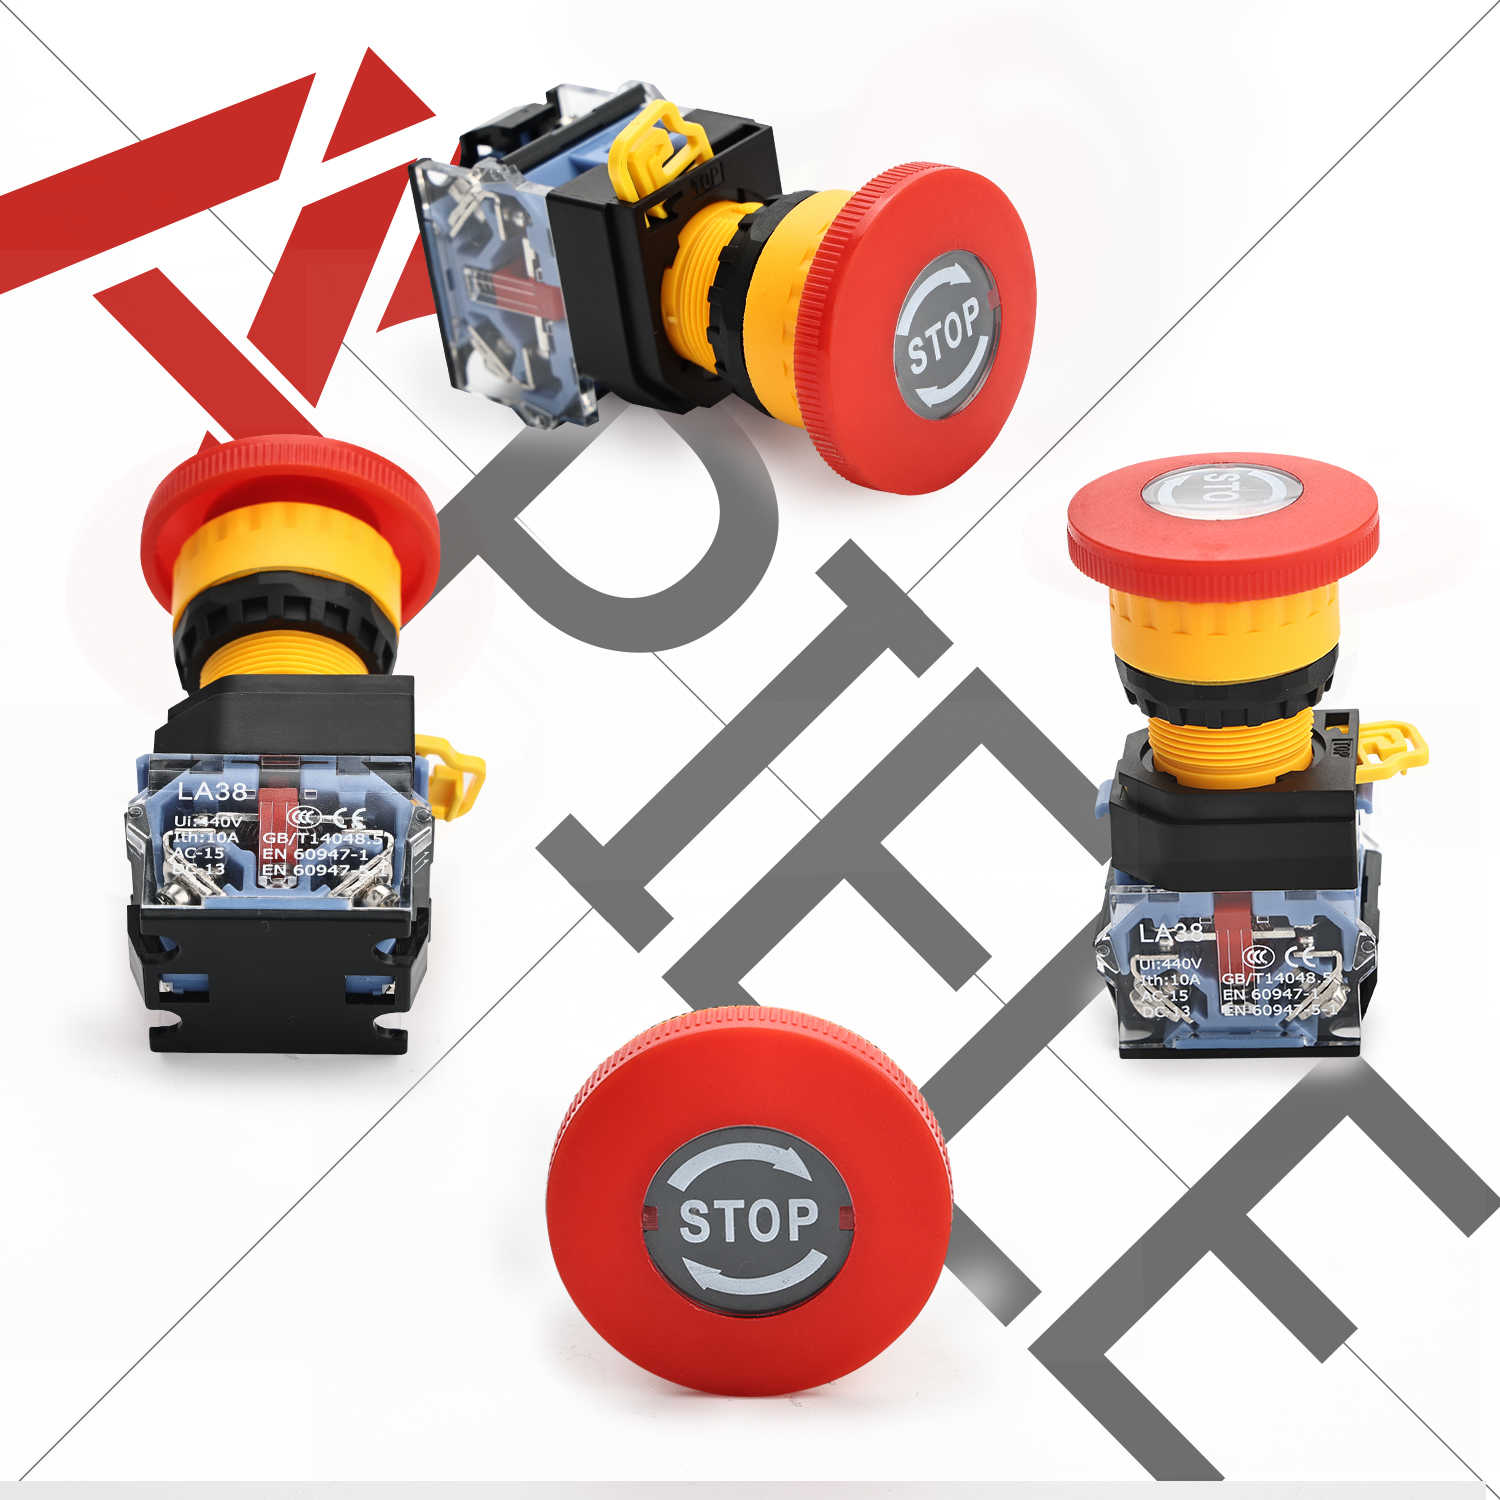 22mm 2NC Red Stop Singal 600V 10 Amp Mushroom Emergency Stop Push Button Switch with four different angles